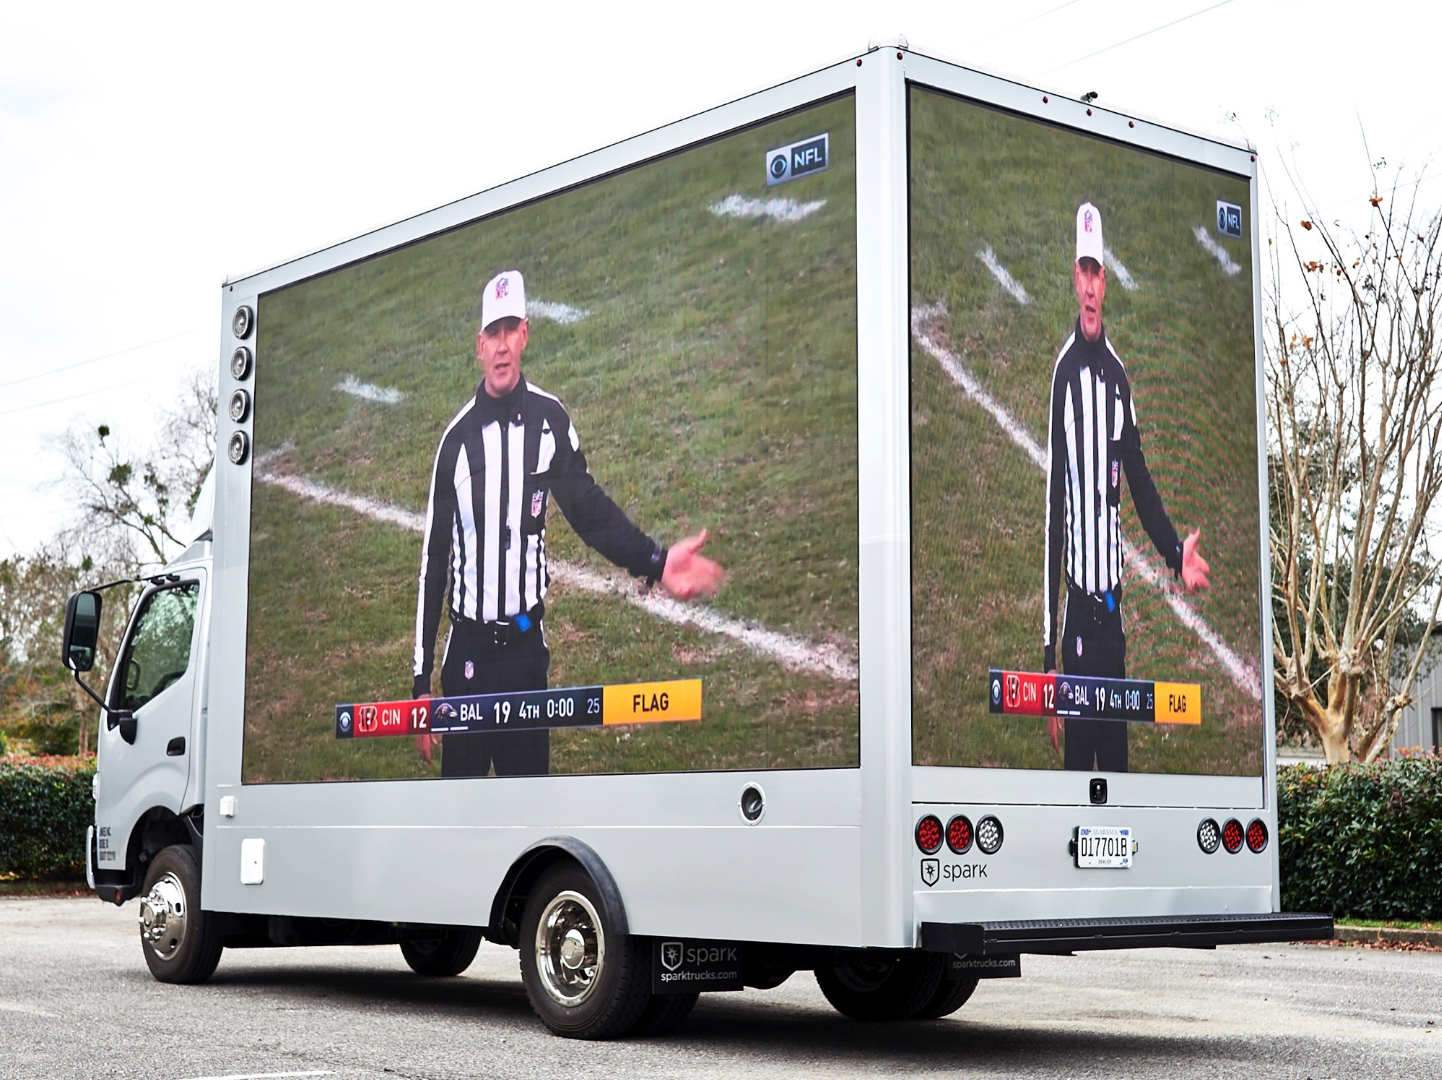 A Spark Video Truck with a Live LED screen advertisement.